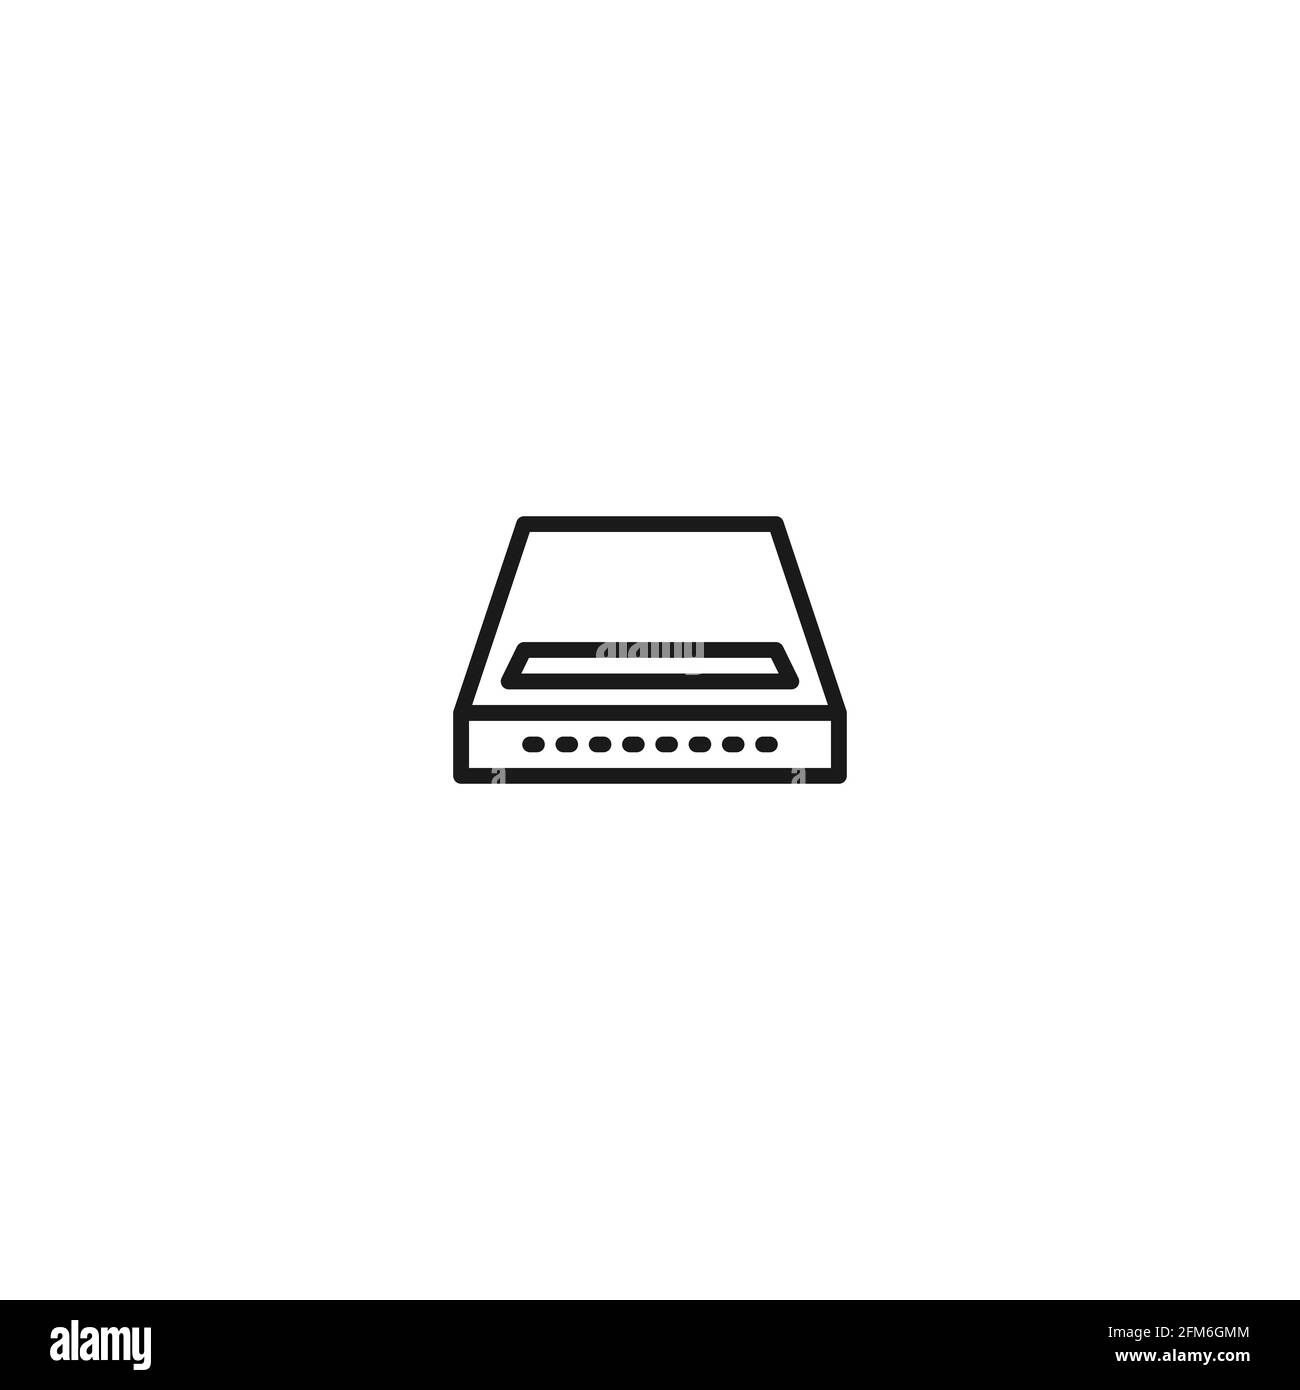 Storage Hard Disk Computer Icon Illustration Design Template with outline style Stock Vector